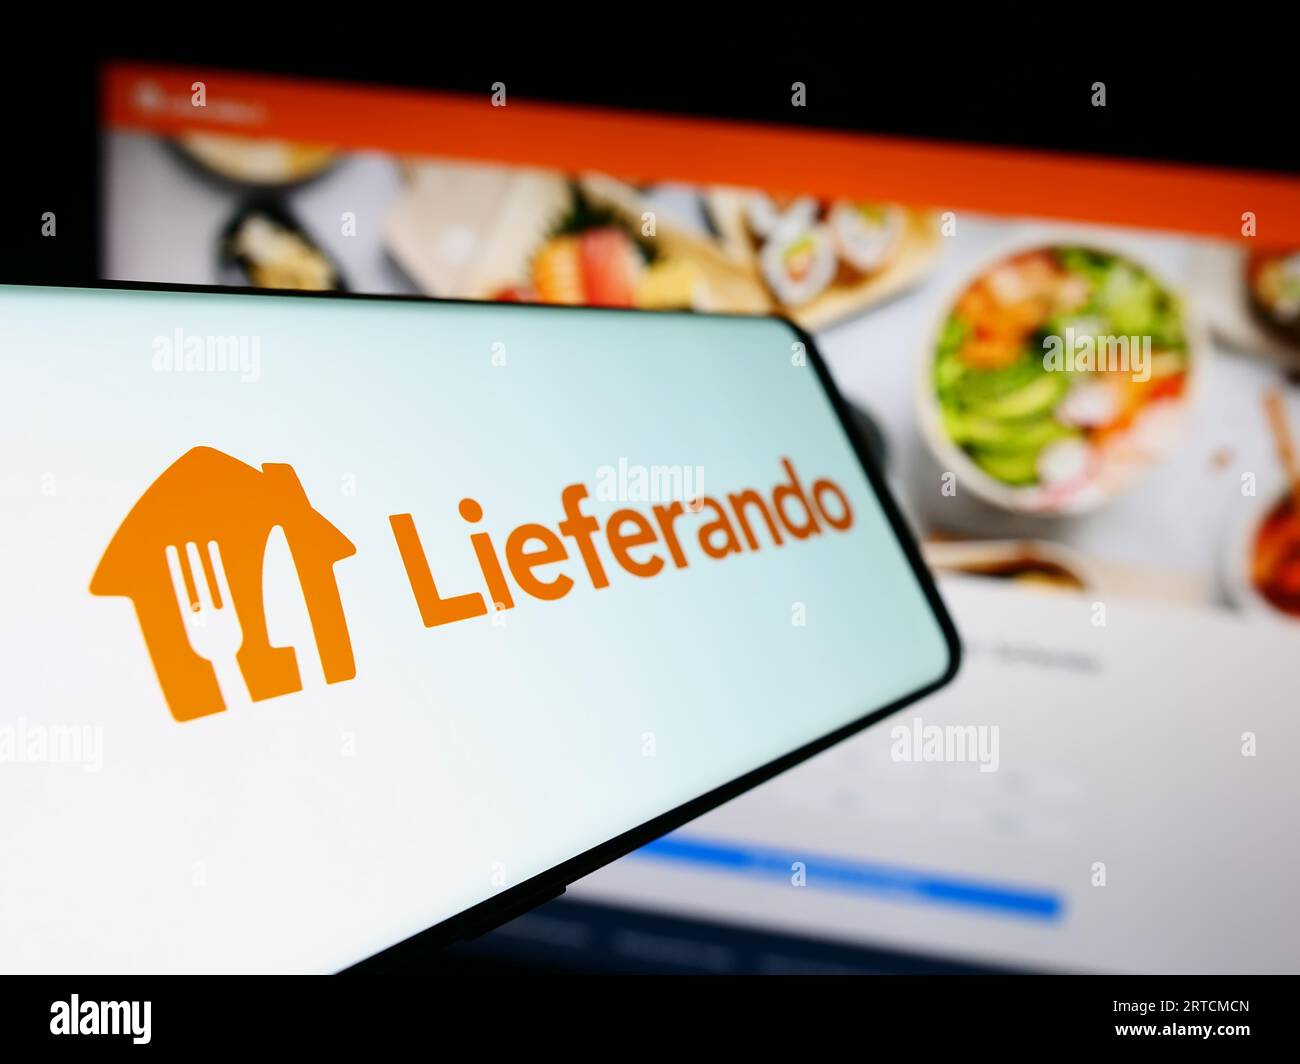 Cellphone with logo of German food delivery company Lieferando on screen in front of business website. Focus on left of phone display. Stock Photo